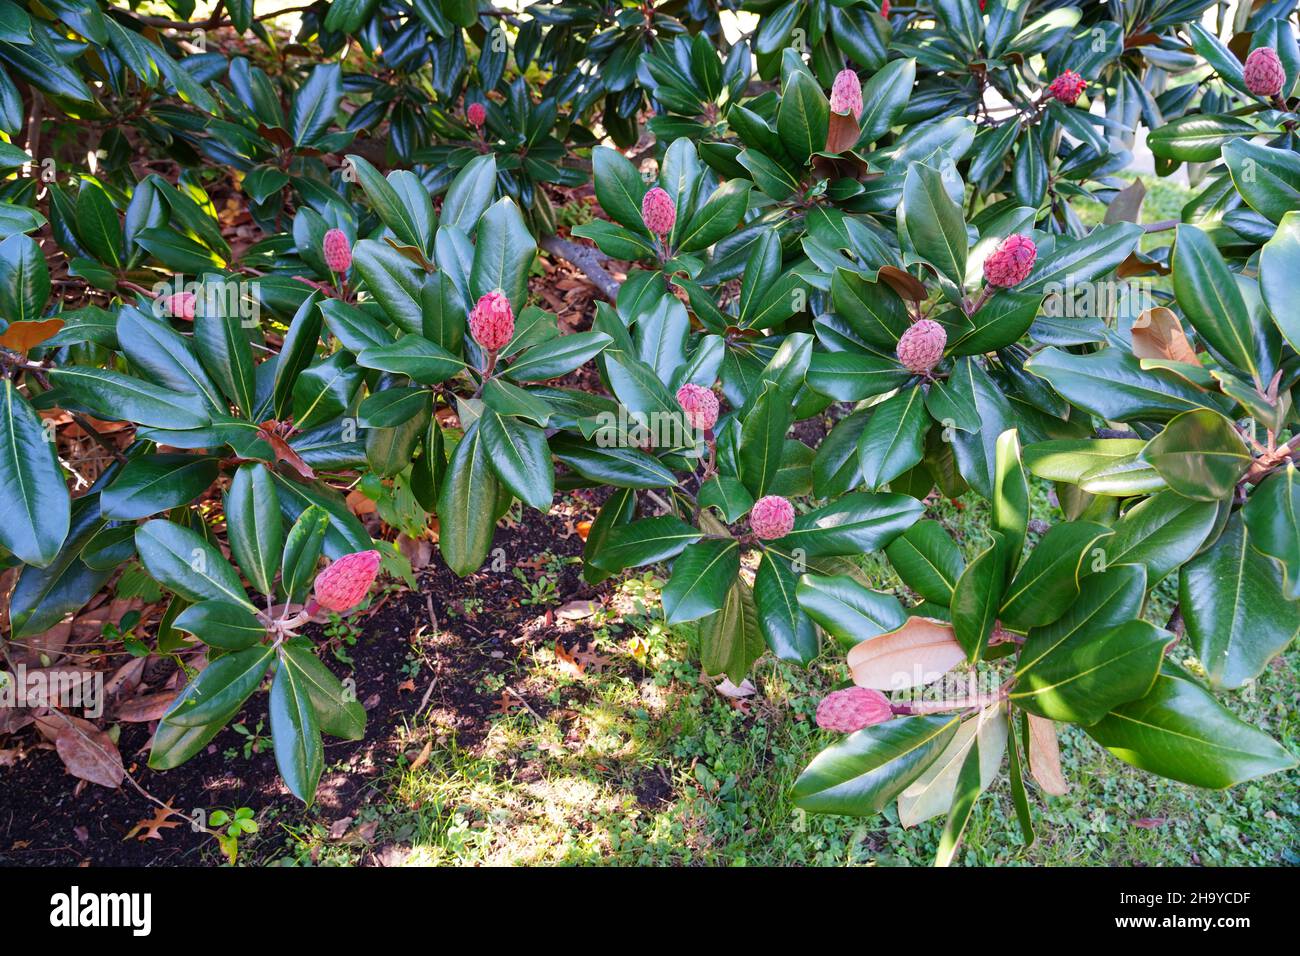 Red fruit cones of the Southern Magnolia tree Stock Photo